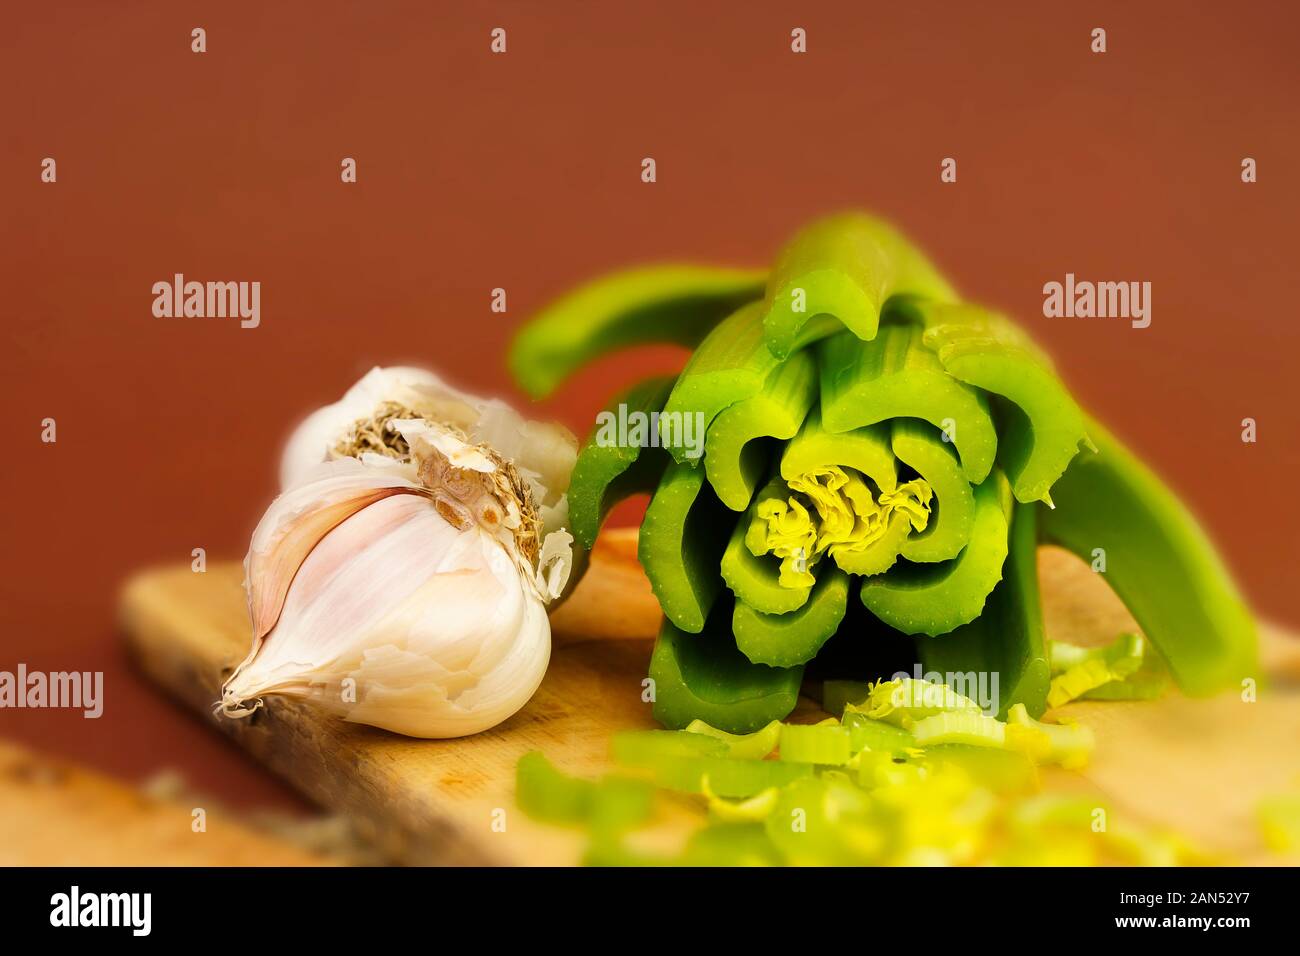 Macro horizontal photograph of garlish cloves and cut celery side by side on a cutting board. Stock Photo